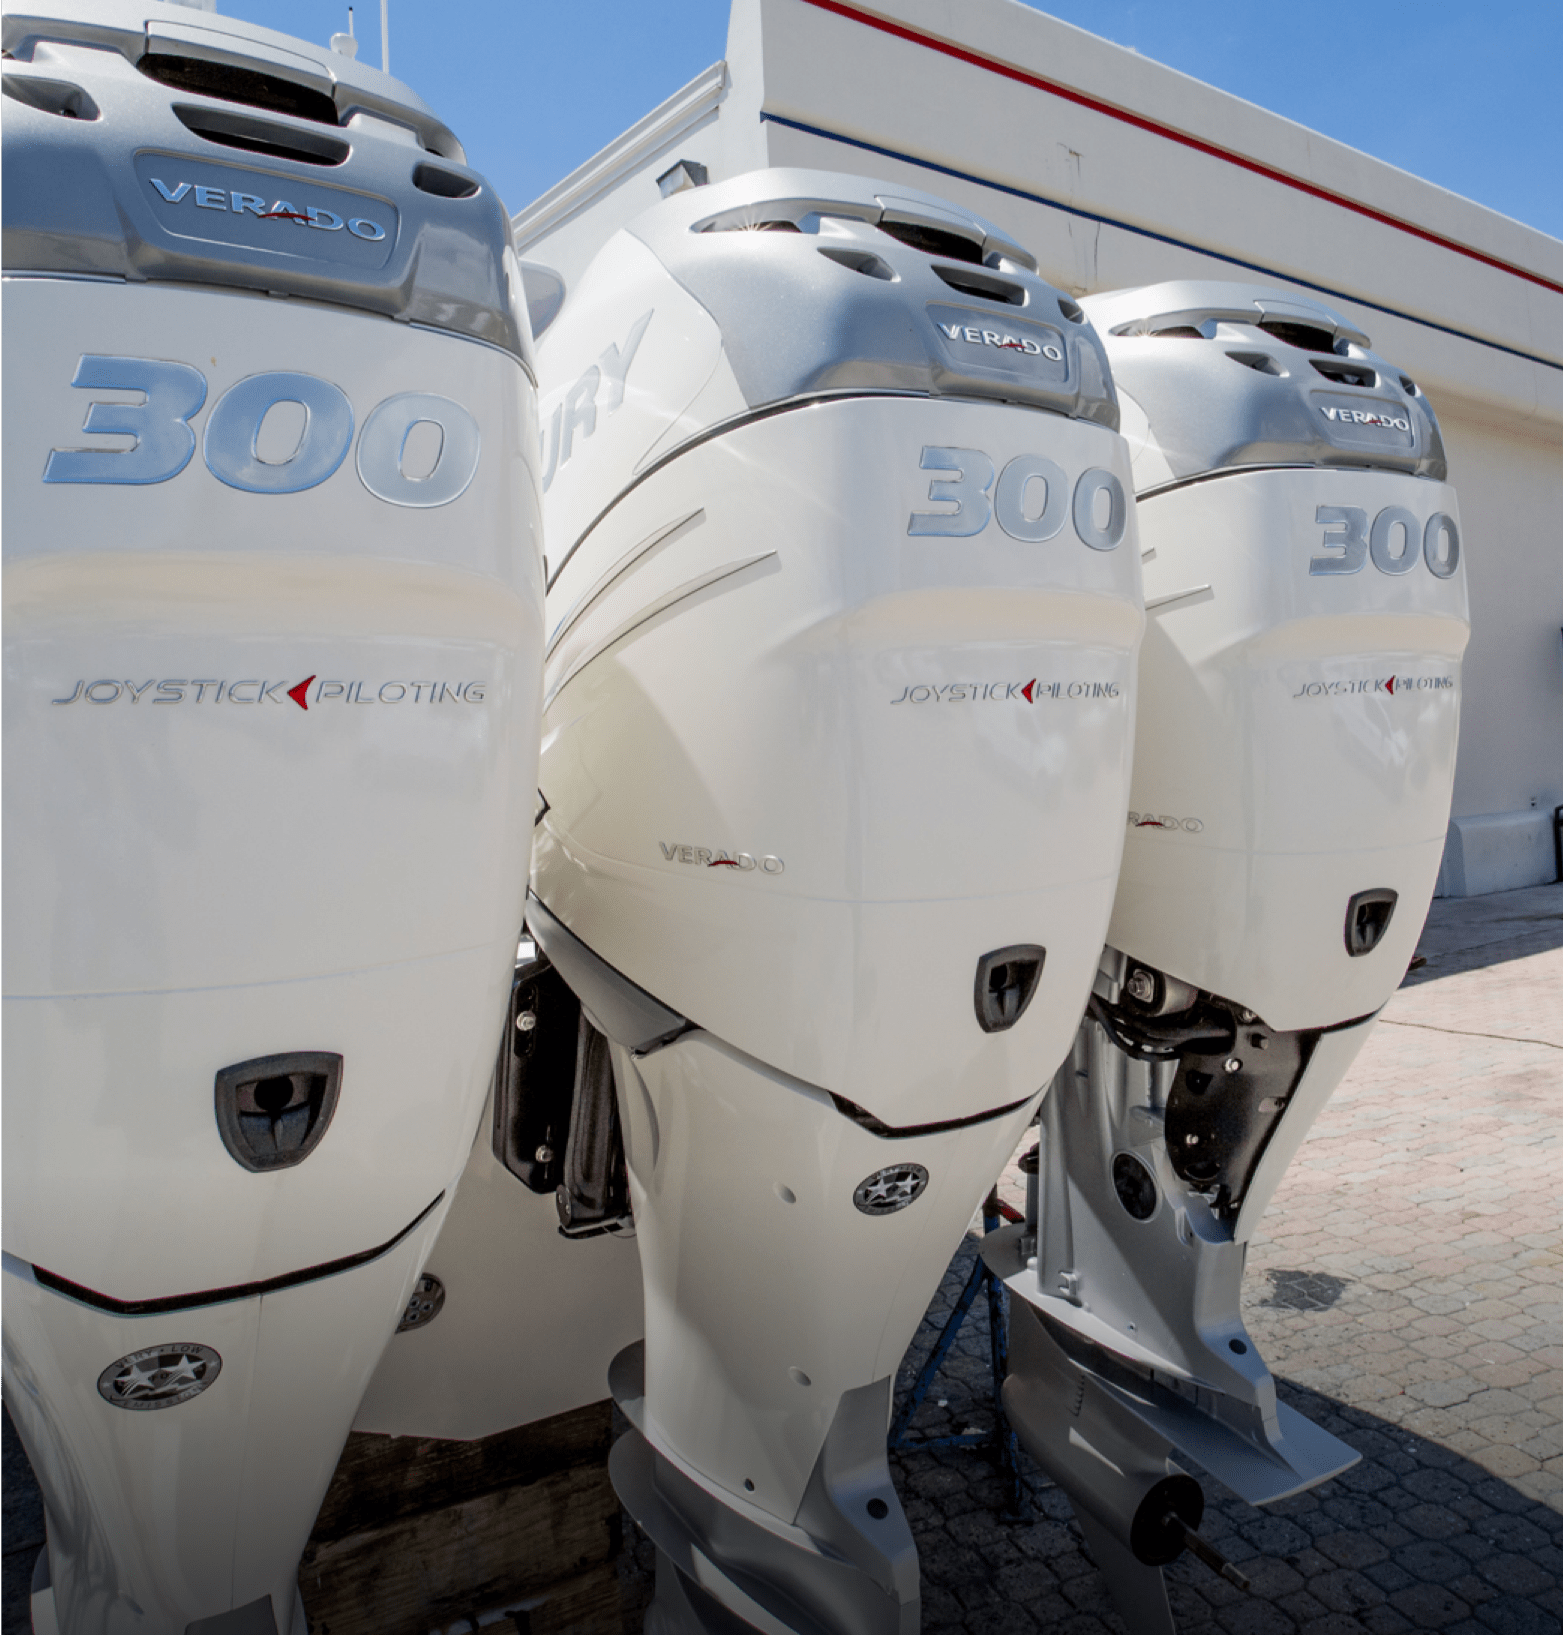 Three outboard boat engines